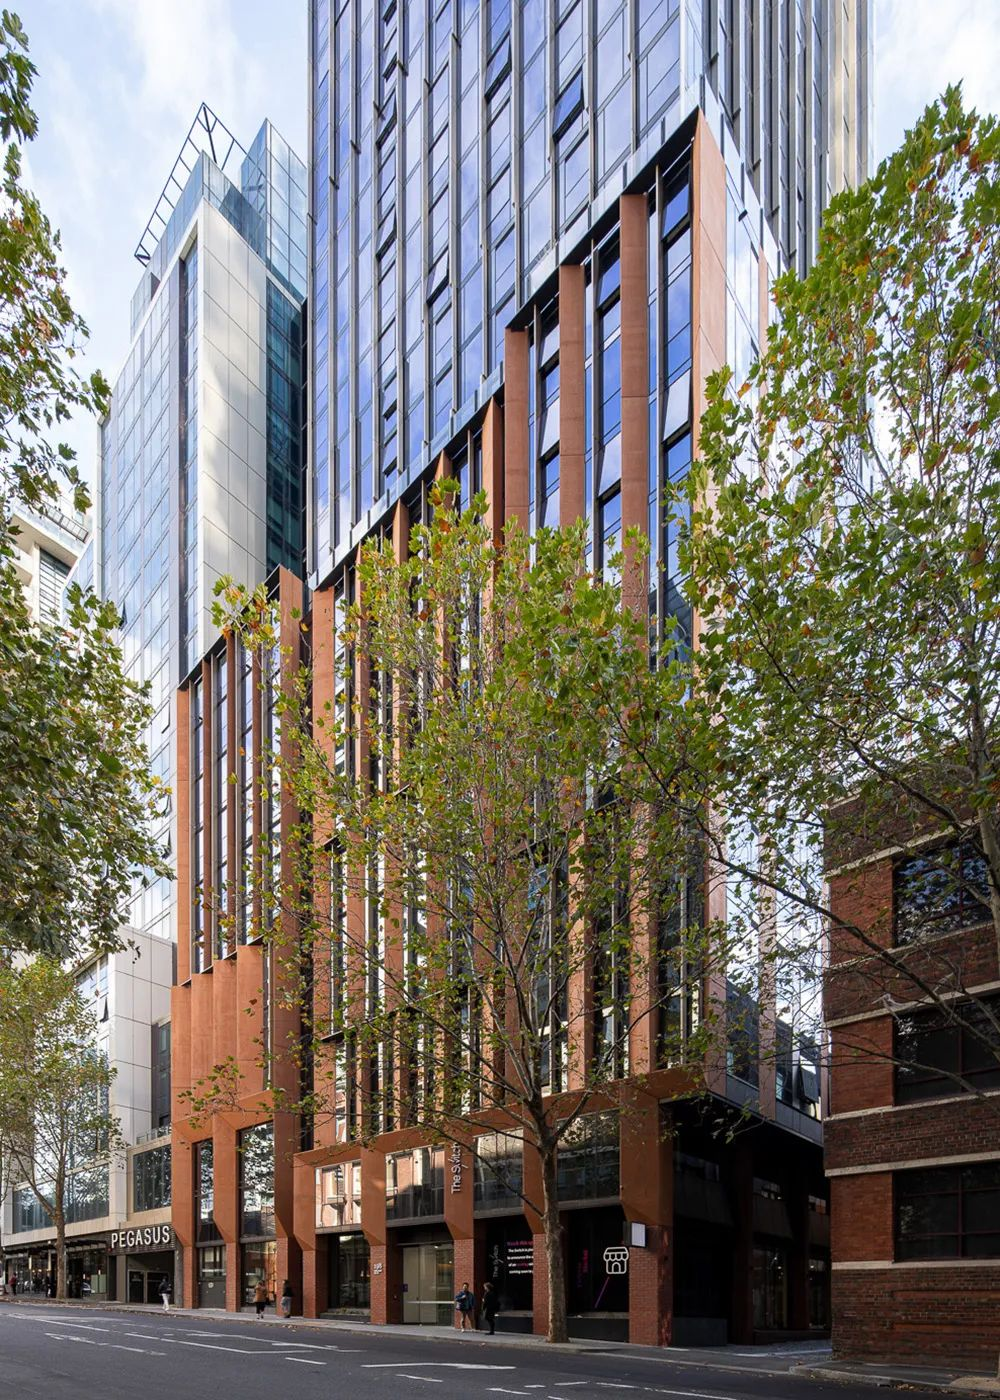 Completed Project Display Series | Melbourne Internet Celebrity Apartments -192-204 A’Beckett Street!